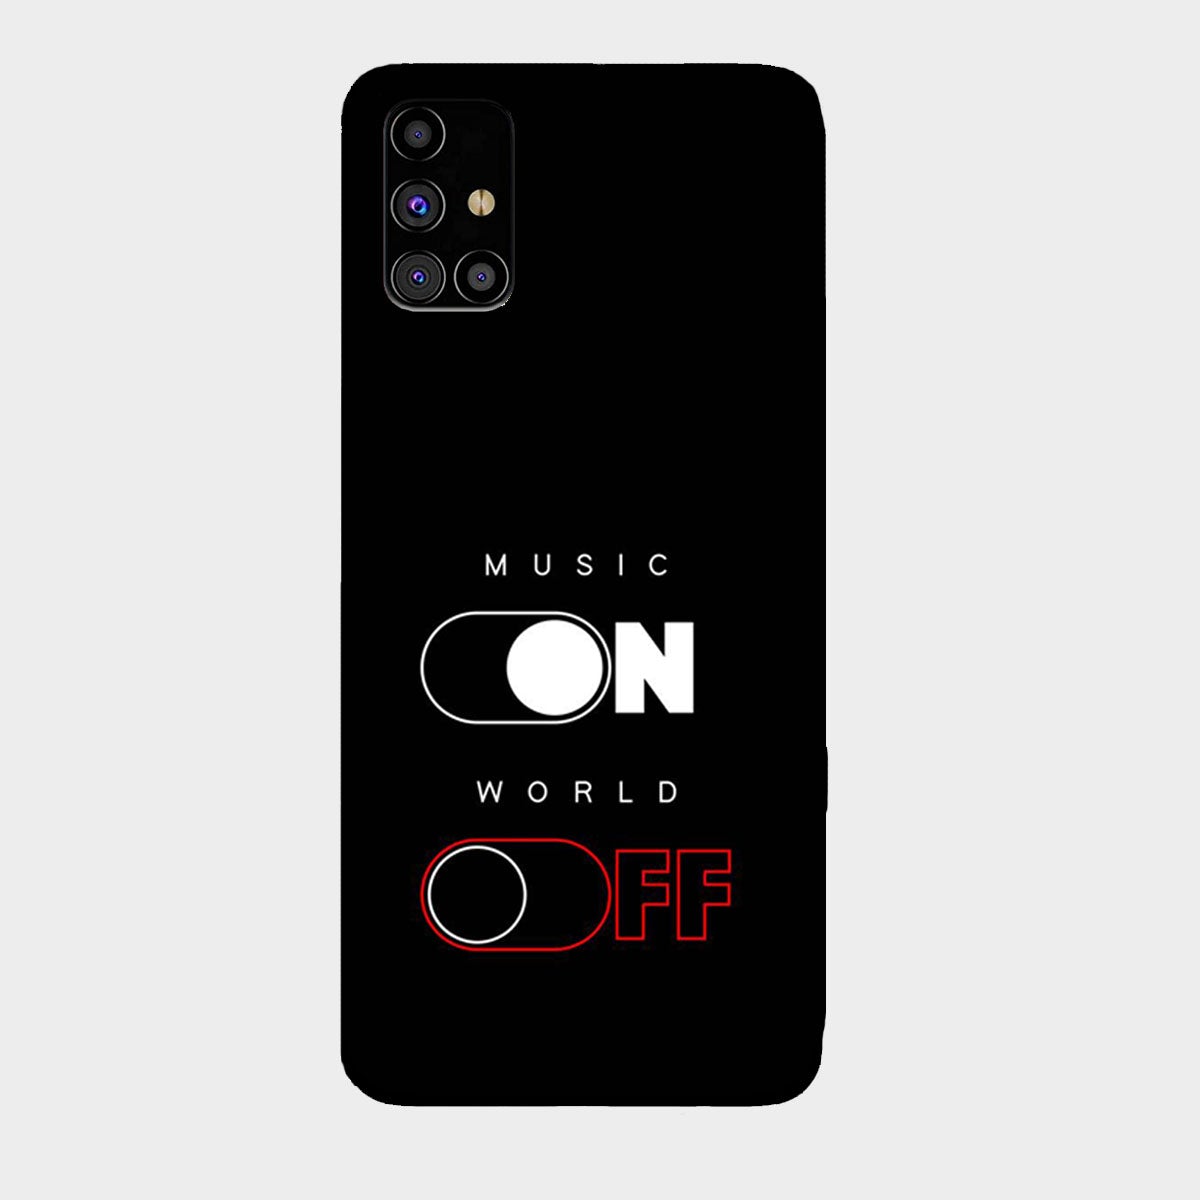 Music On World Off - Mobile Phone Cover - Hard Case - Samsung - Samsung